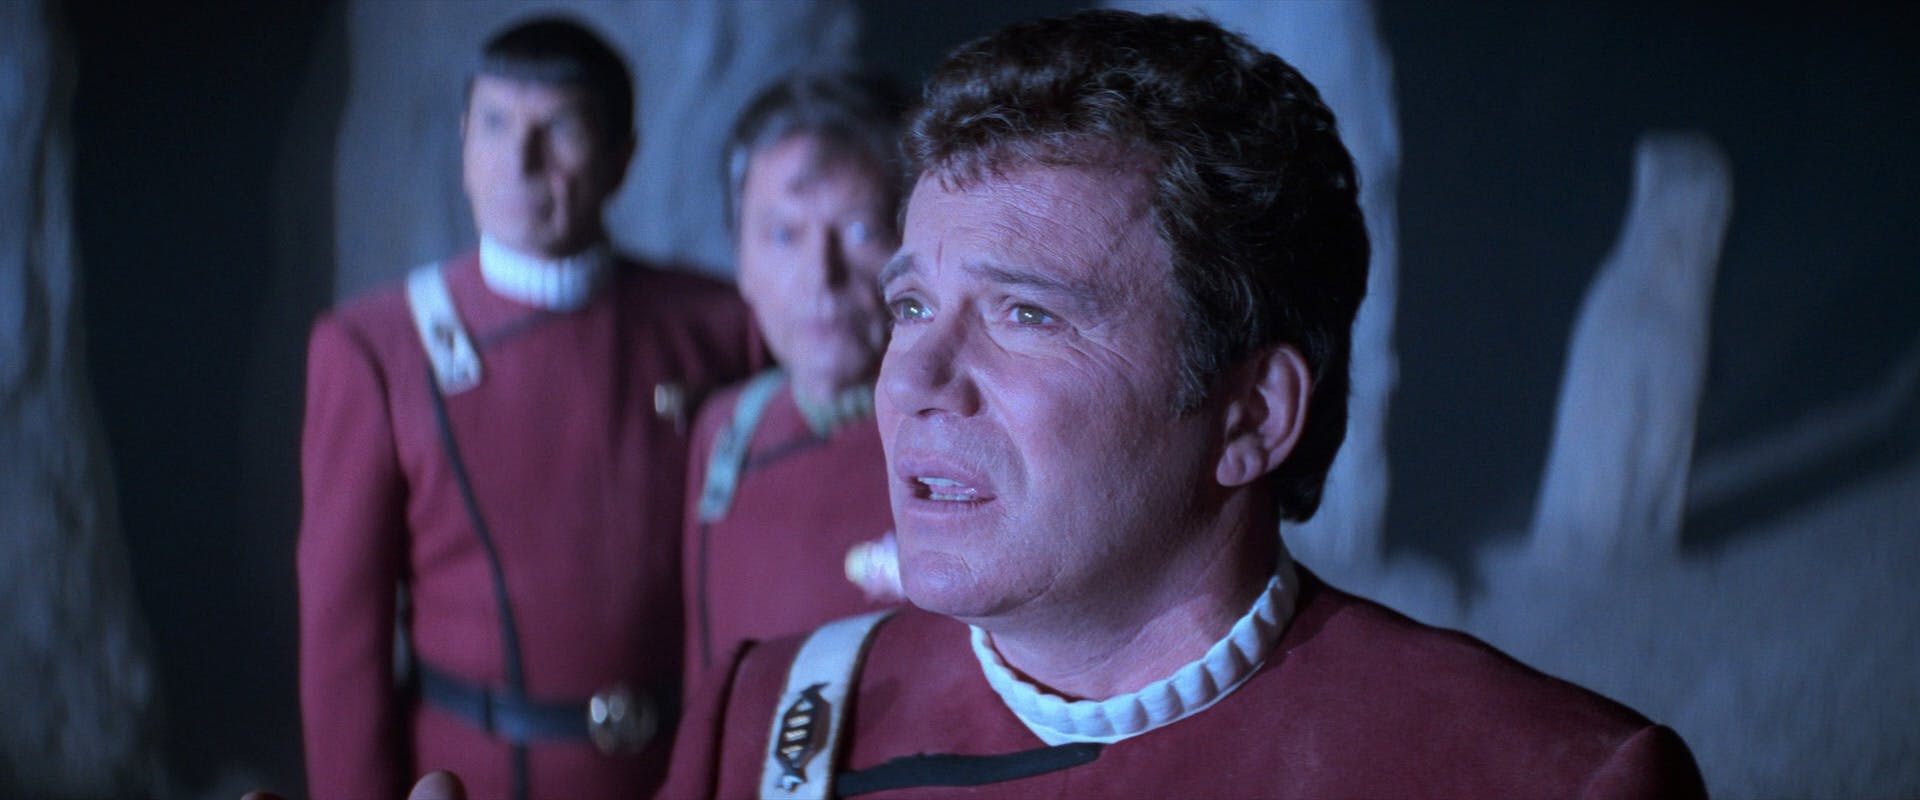 Kirk looks out towards the god of Sha Ke Ree wondering what it needs with a starship as Spock looks out as well, while McCoy looks over at his captain in Star Trek V: The Final Frontier